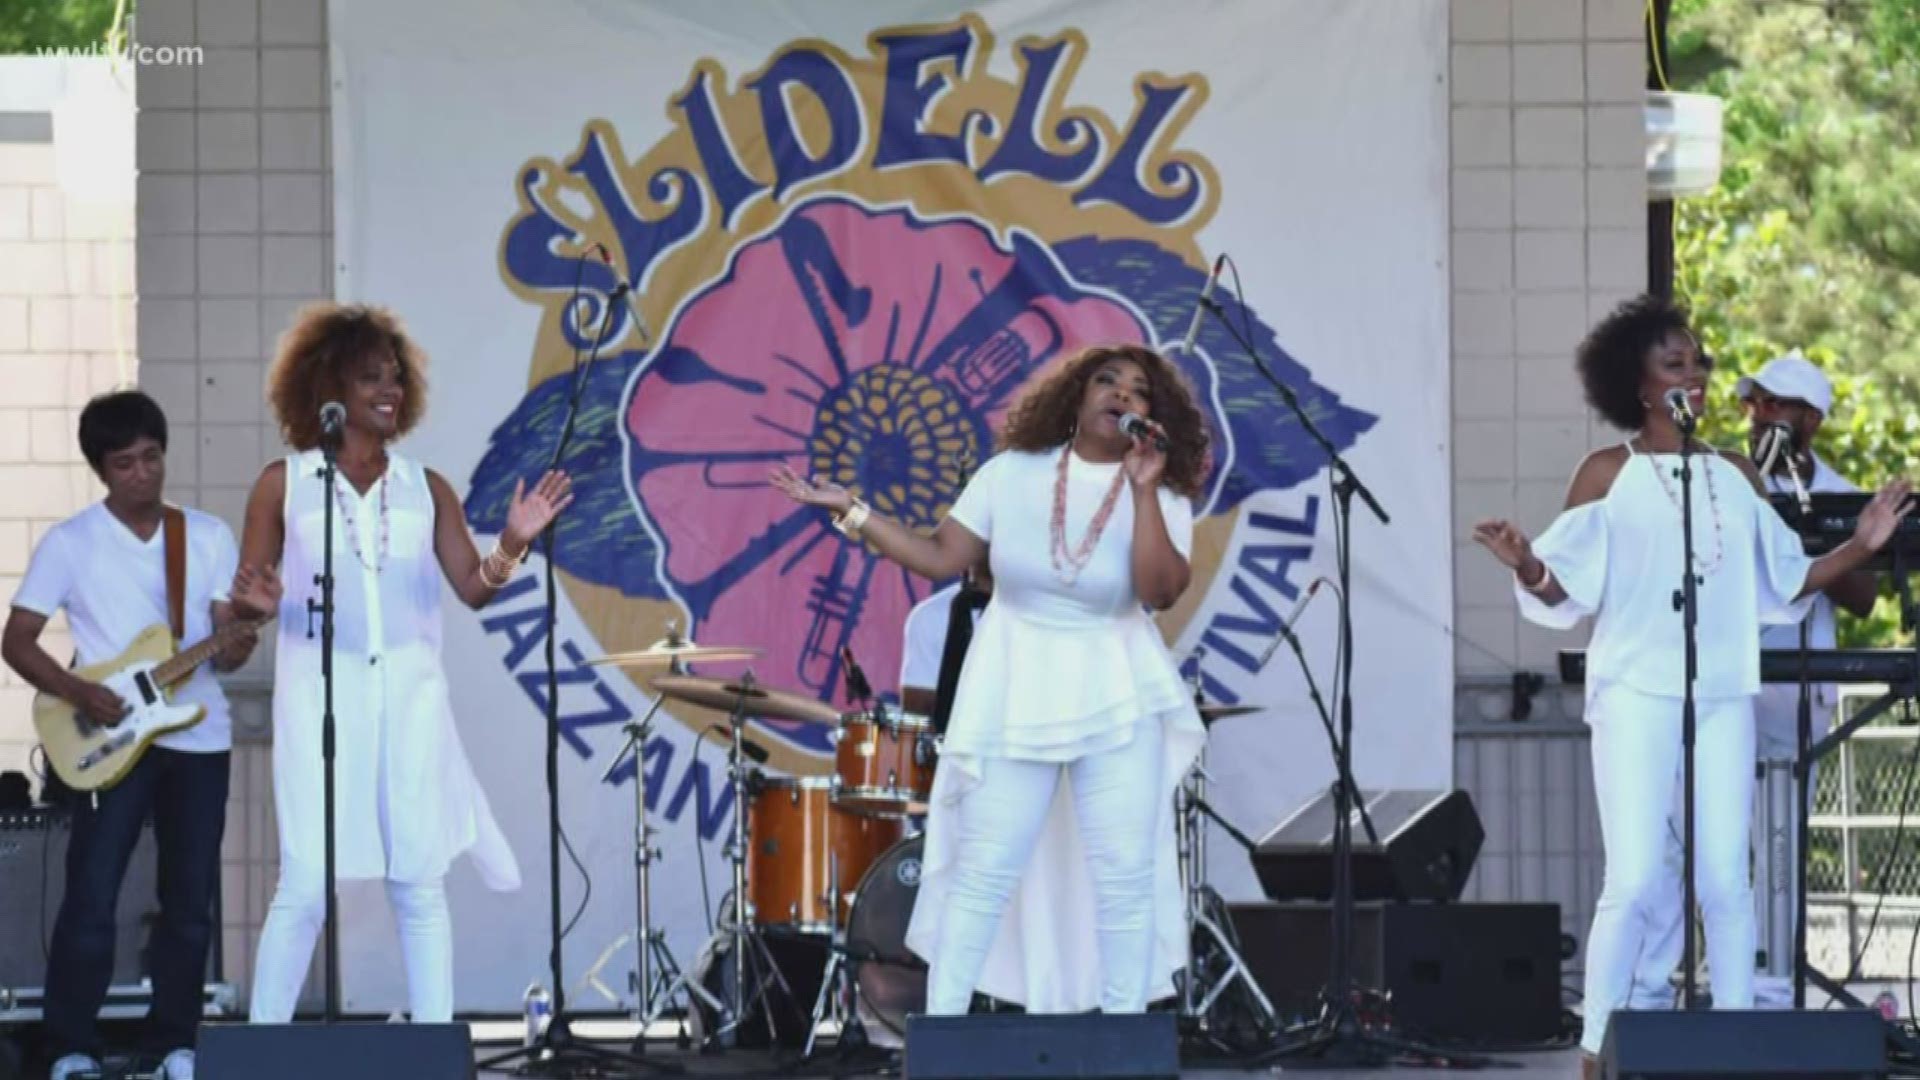 Come out to Slidell and enjoy some smooth Jazz and Blues music this weekend in Heritage Park for the 5th Annual Jazz and Blues Festival.